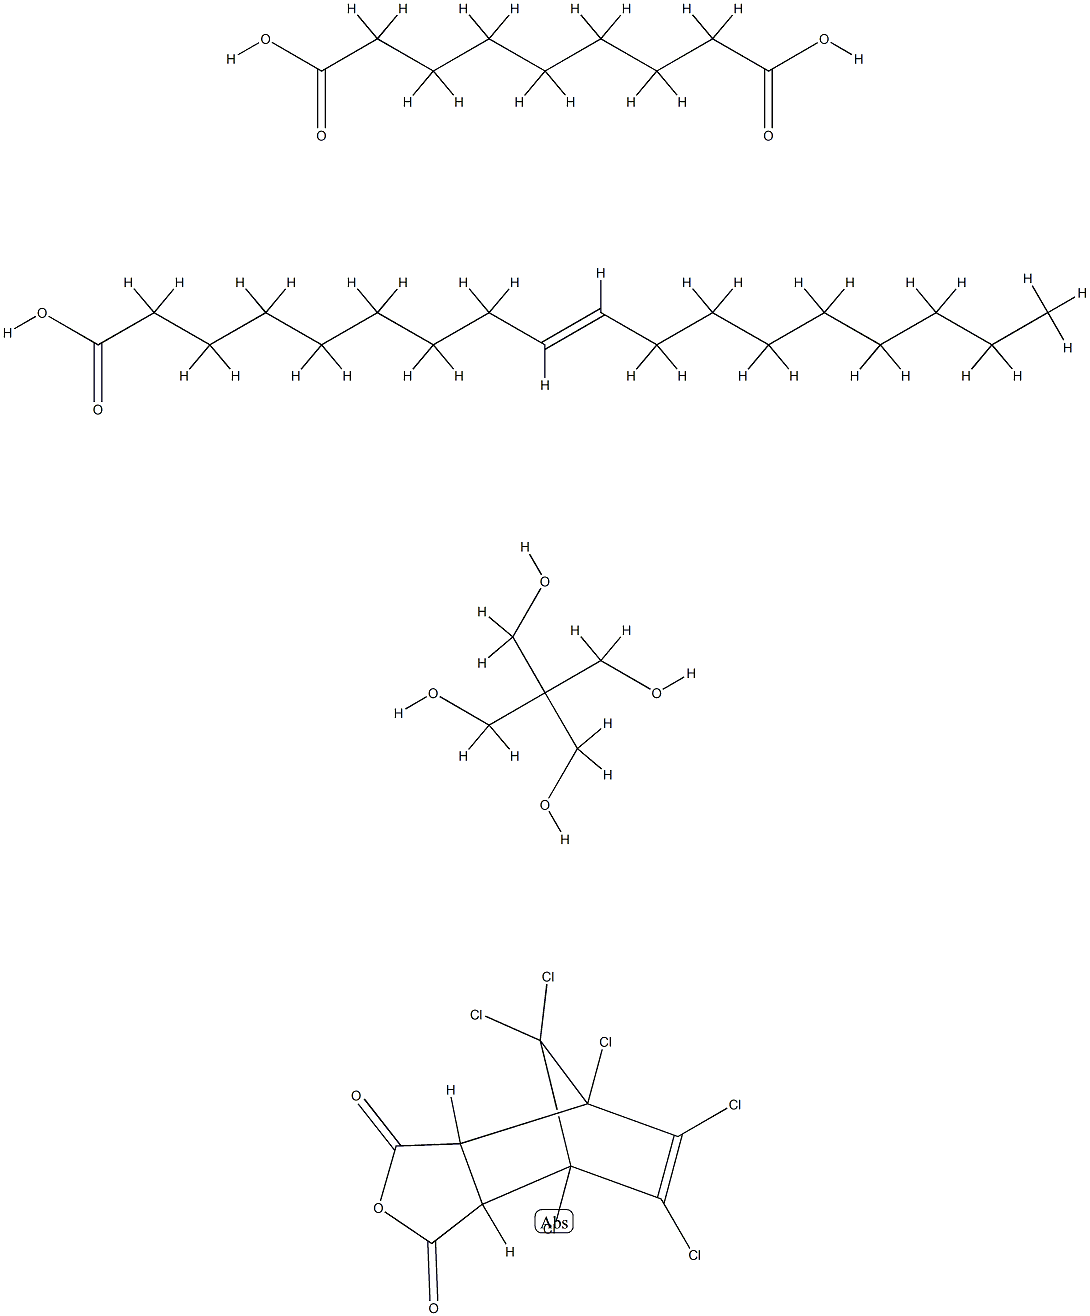 Nonanedioic acid, polymer with 2,2-bis(hydroxymethyl)-1,3-propanediol and 4,5,6,7,8,8-hexachloro-3a, 4,7,7a-tetrahydro-4,7-methanoisobenzofuran-1,3-dione , (Z)-9-octadecenoate Structure